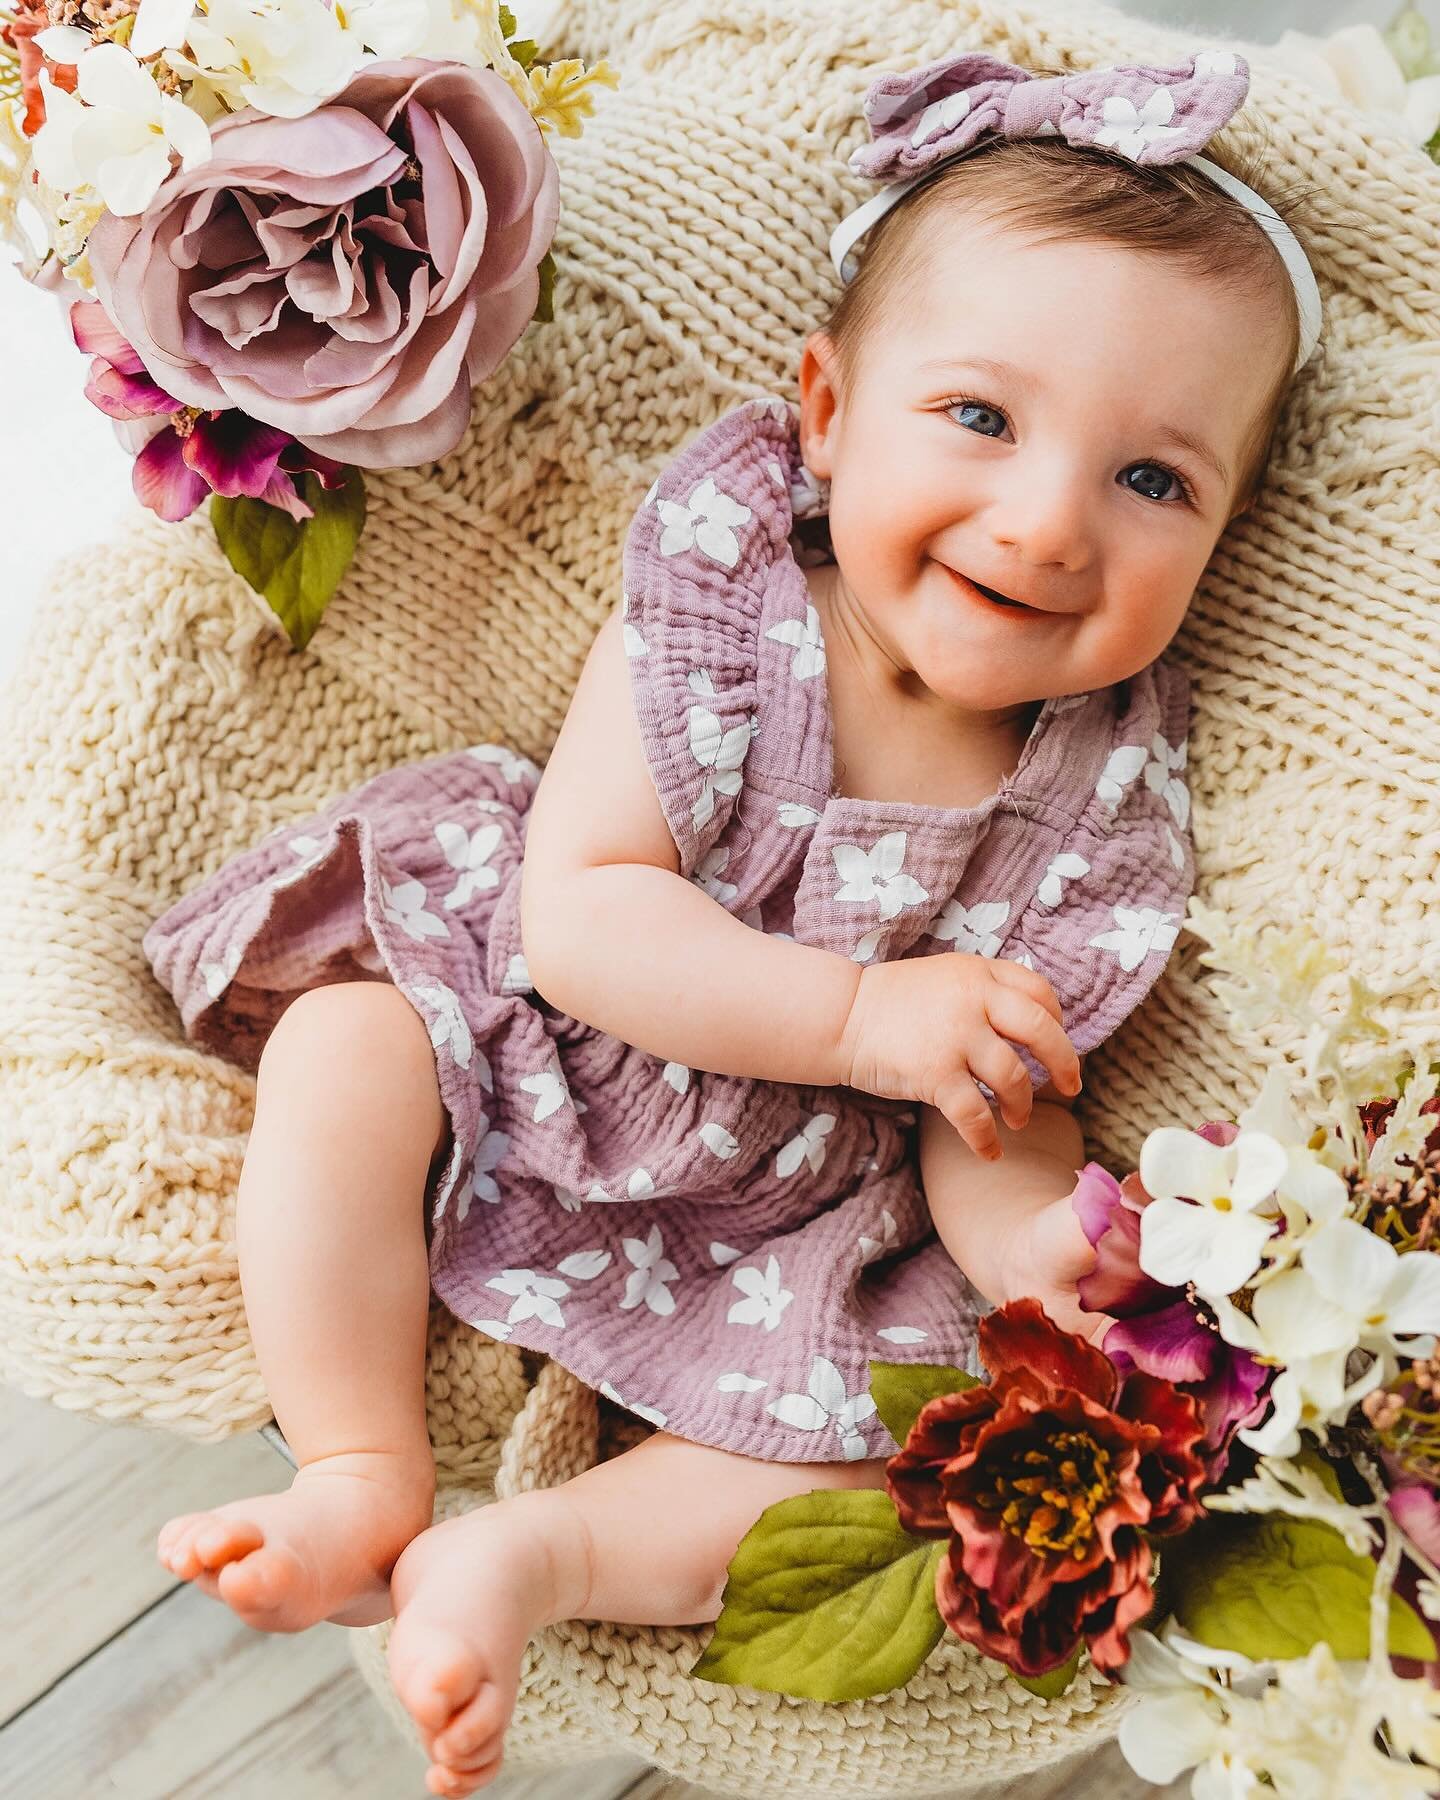 life is so much more beautiful now that we have you. 💜 sweet vi we love you always &amp; forever. 🤍 #baby #love #6monthsold #beautiful #kellysamiaphotography #canonr6 #purple #perfect #kellysamiaphoto #joyful #viral #happiness @nick_loch